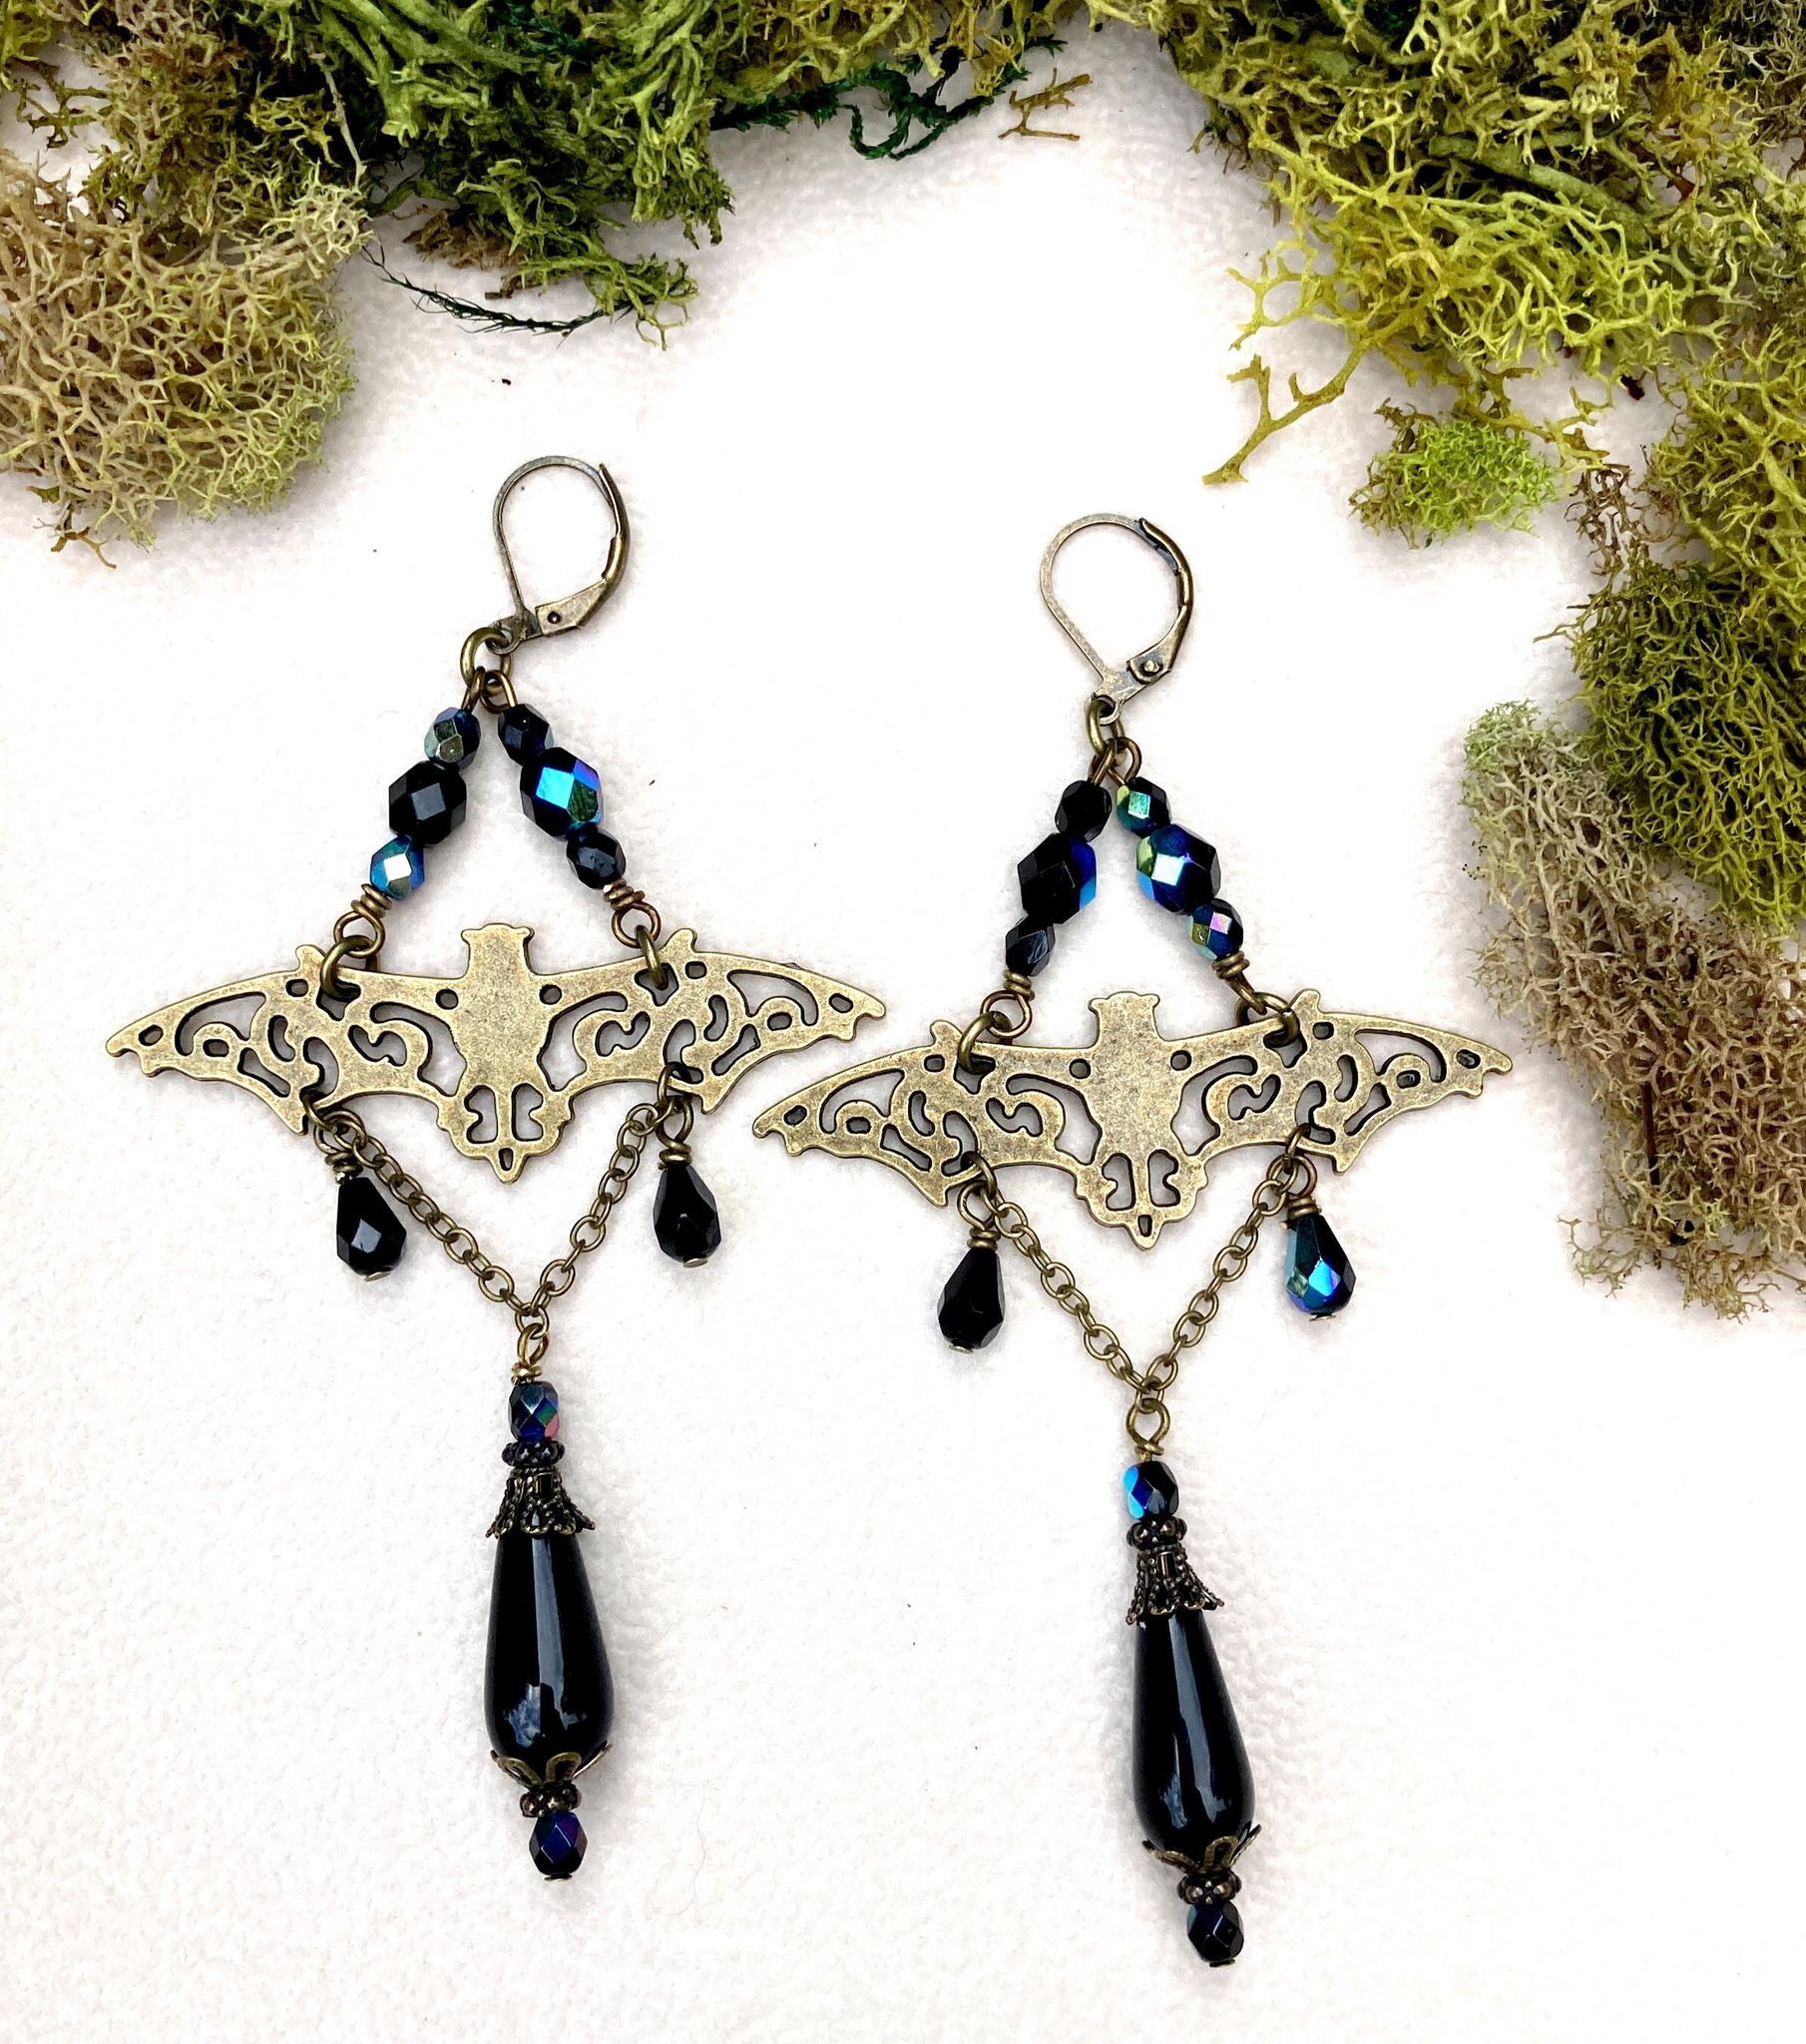 Halloween Crystal beads Earrings, Witchy Crystal Jewelry Earrings